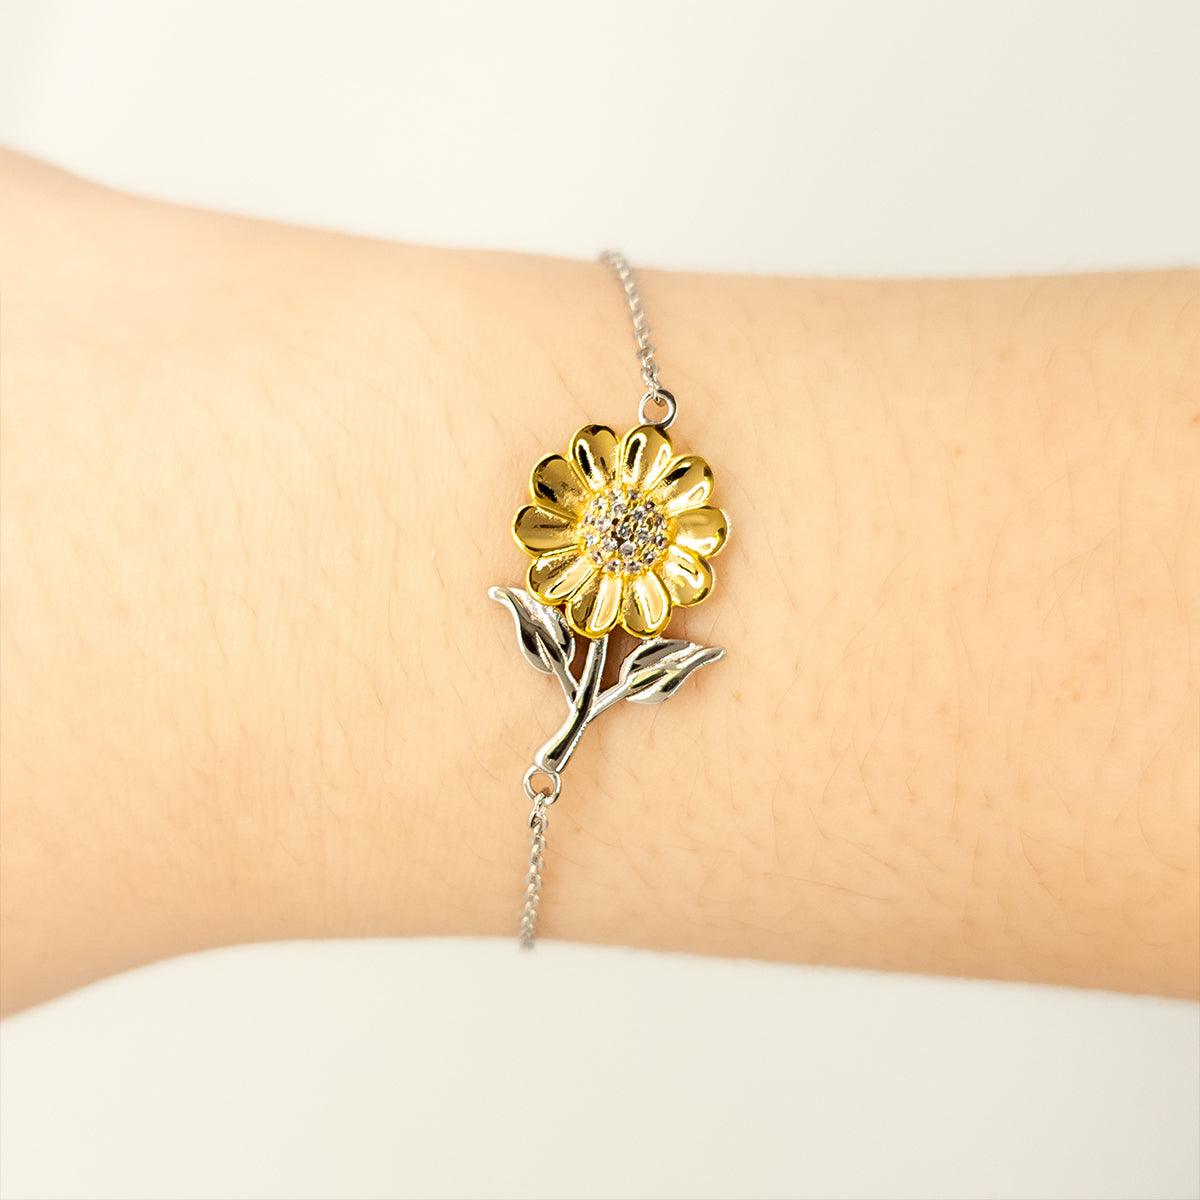 Romantic Soulmate Sunflower Bracelet - I Want to be Your Last Everything - Birthday, Christmas Holiday, Valentine Gifts - Mallard Moon Gift Shop